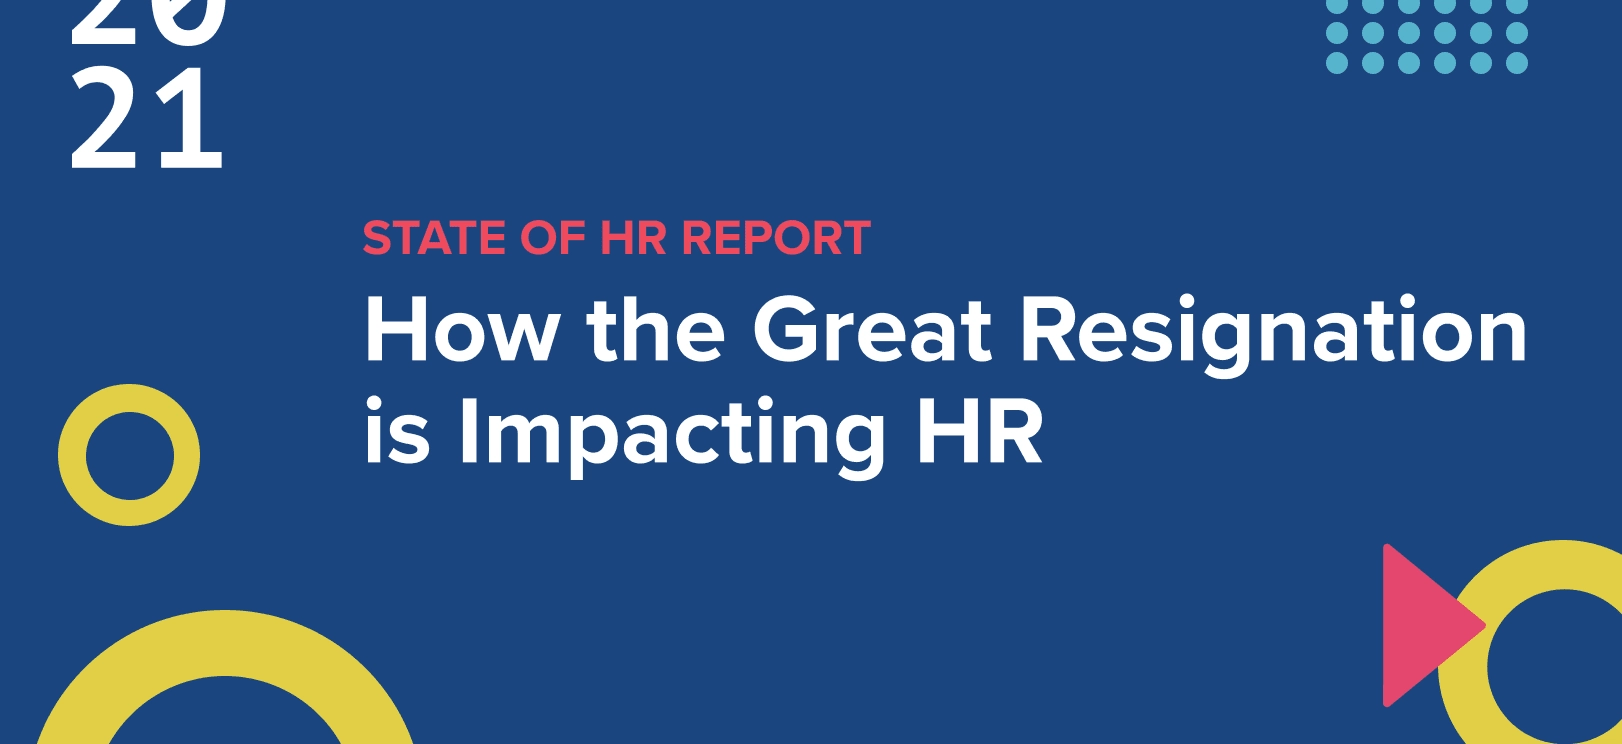 State of HR Report: How the Great Resignation is Impacting HR